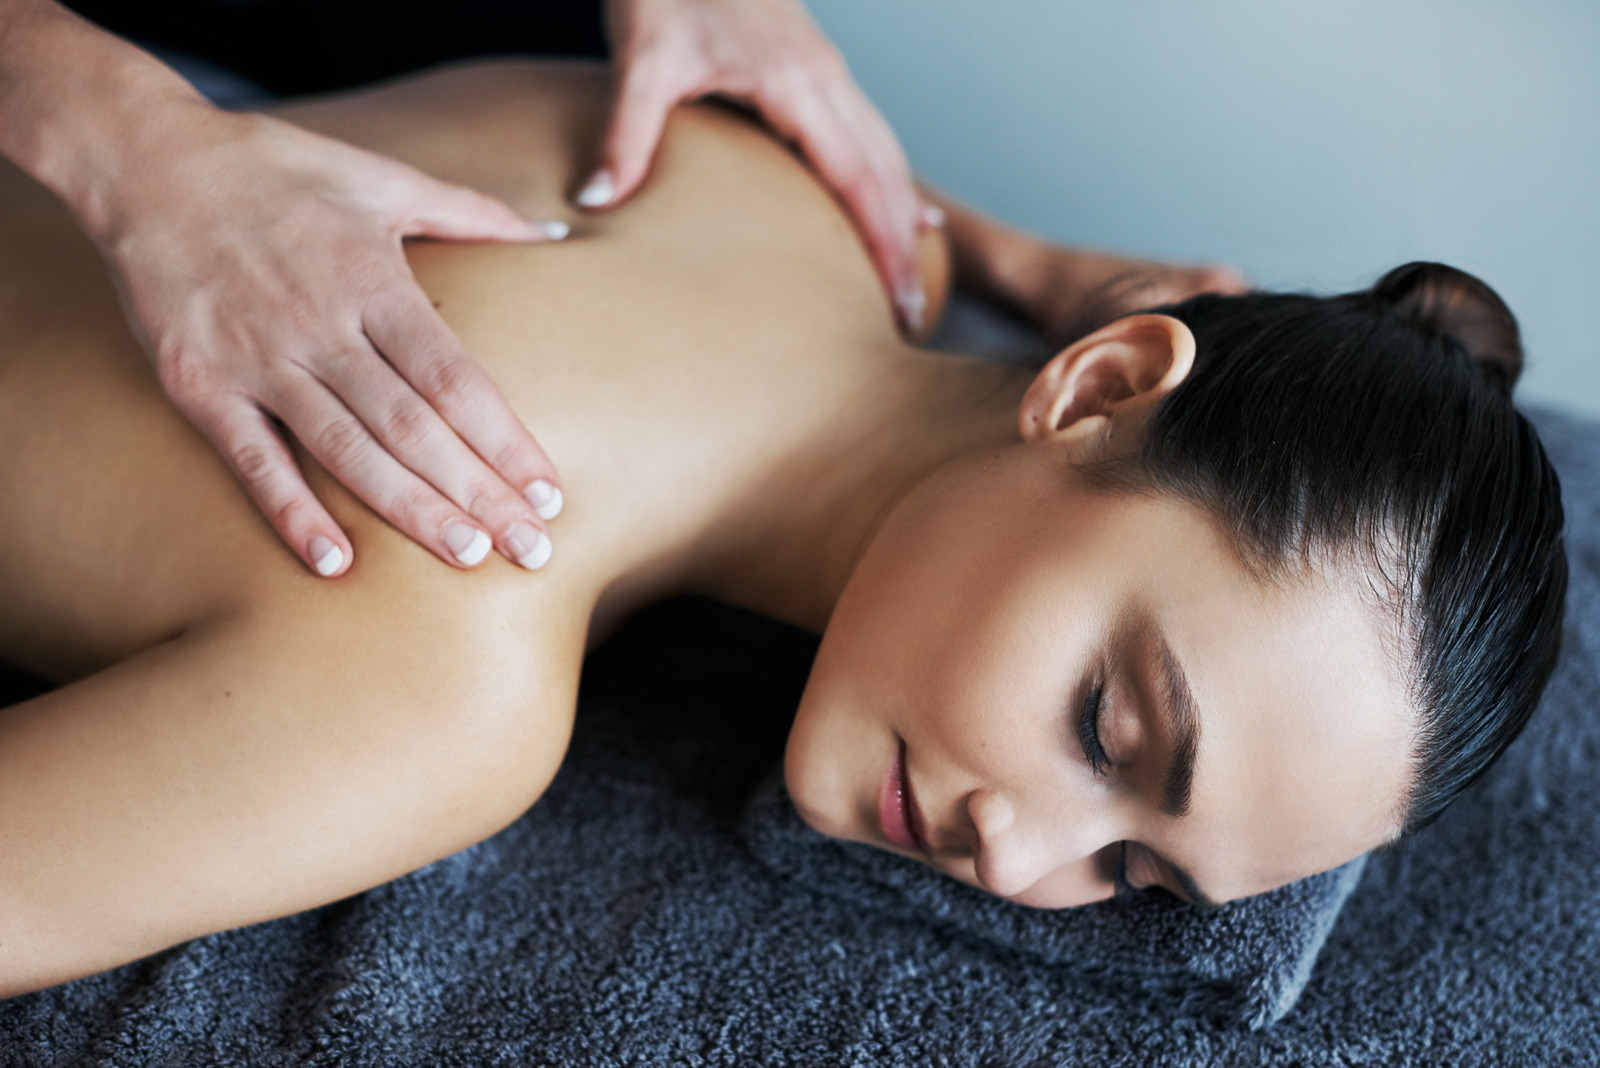 How to give an amazing back massage - Professional Beauty